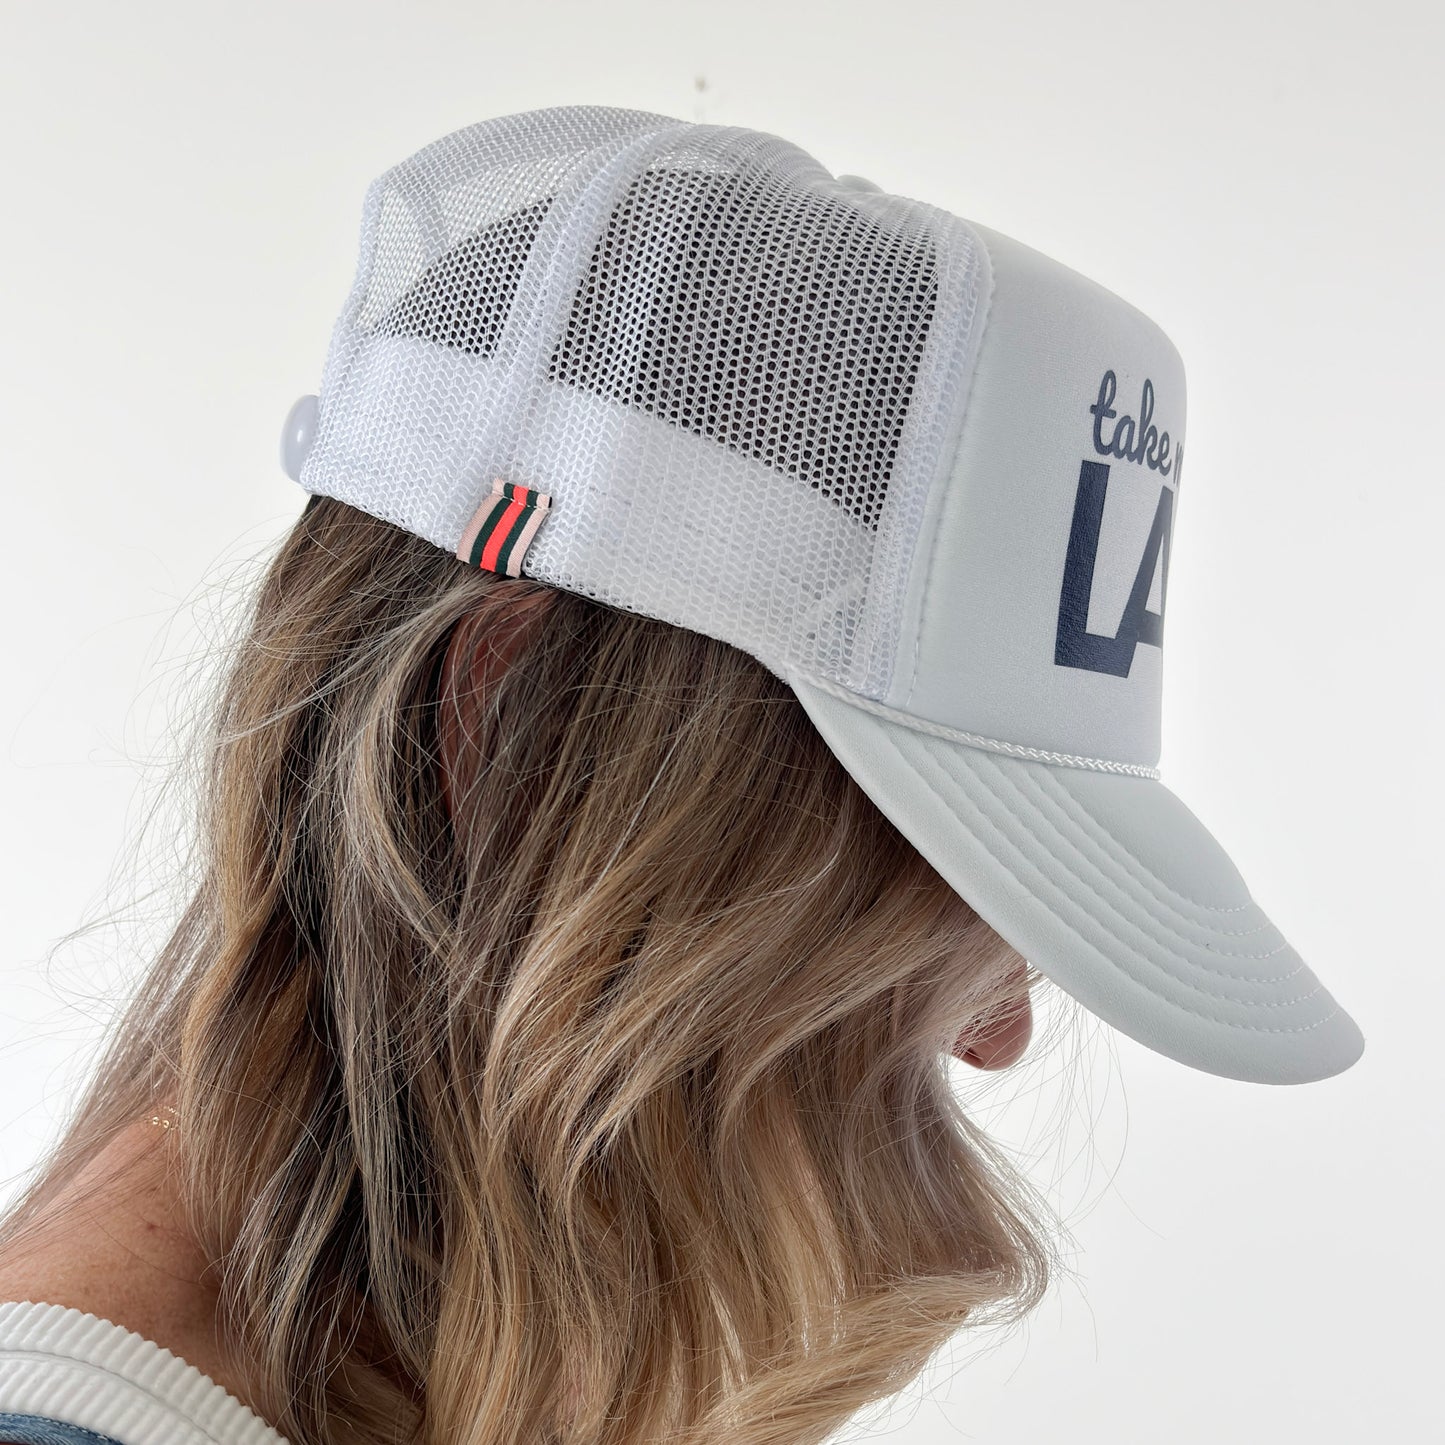 Women's white high profile foam snap back trucker hat with navy blue take me to the lake graphic